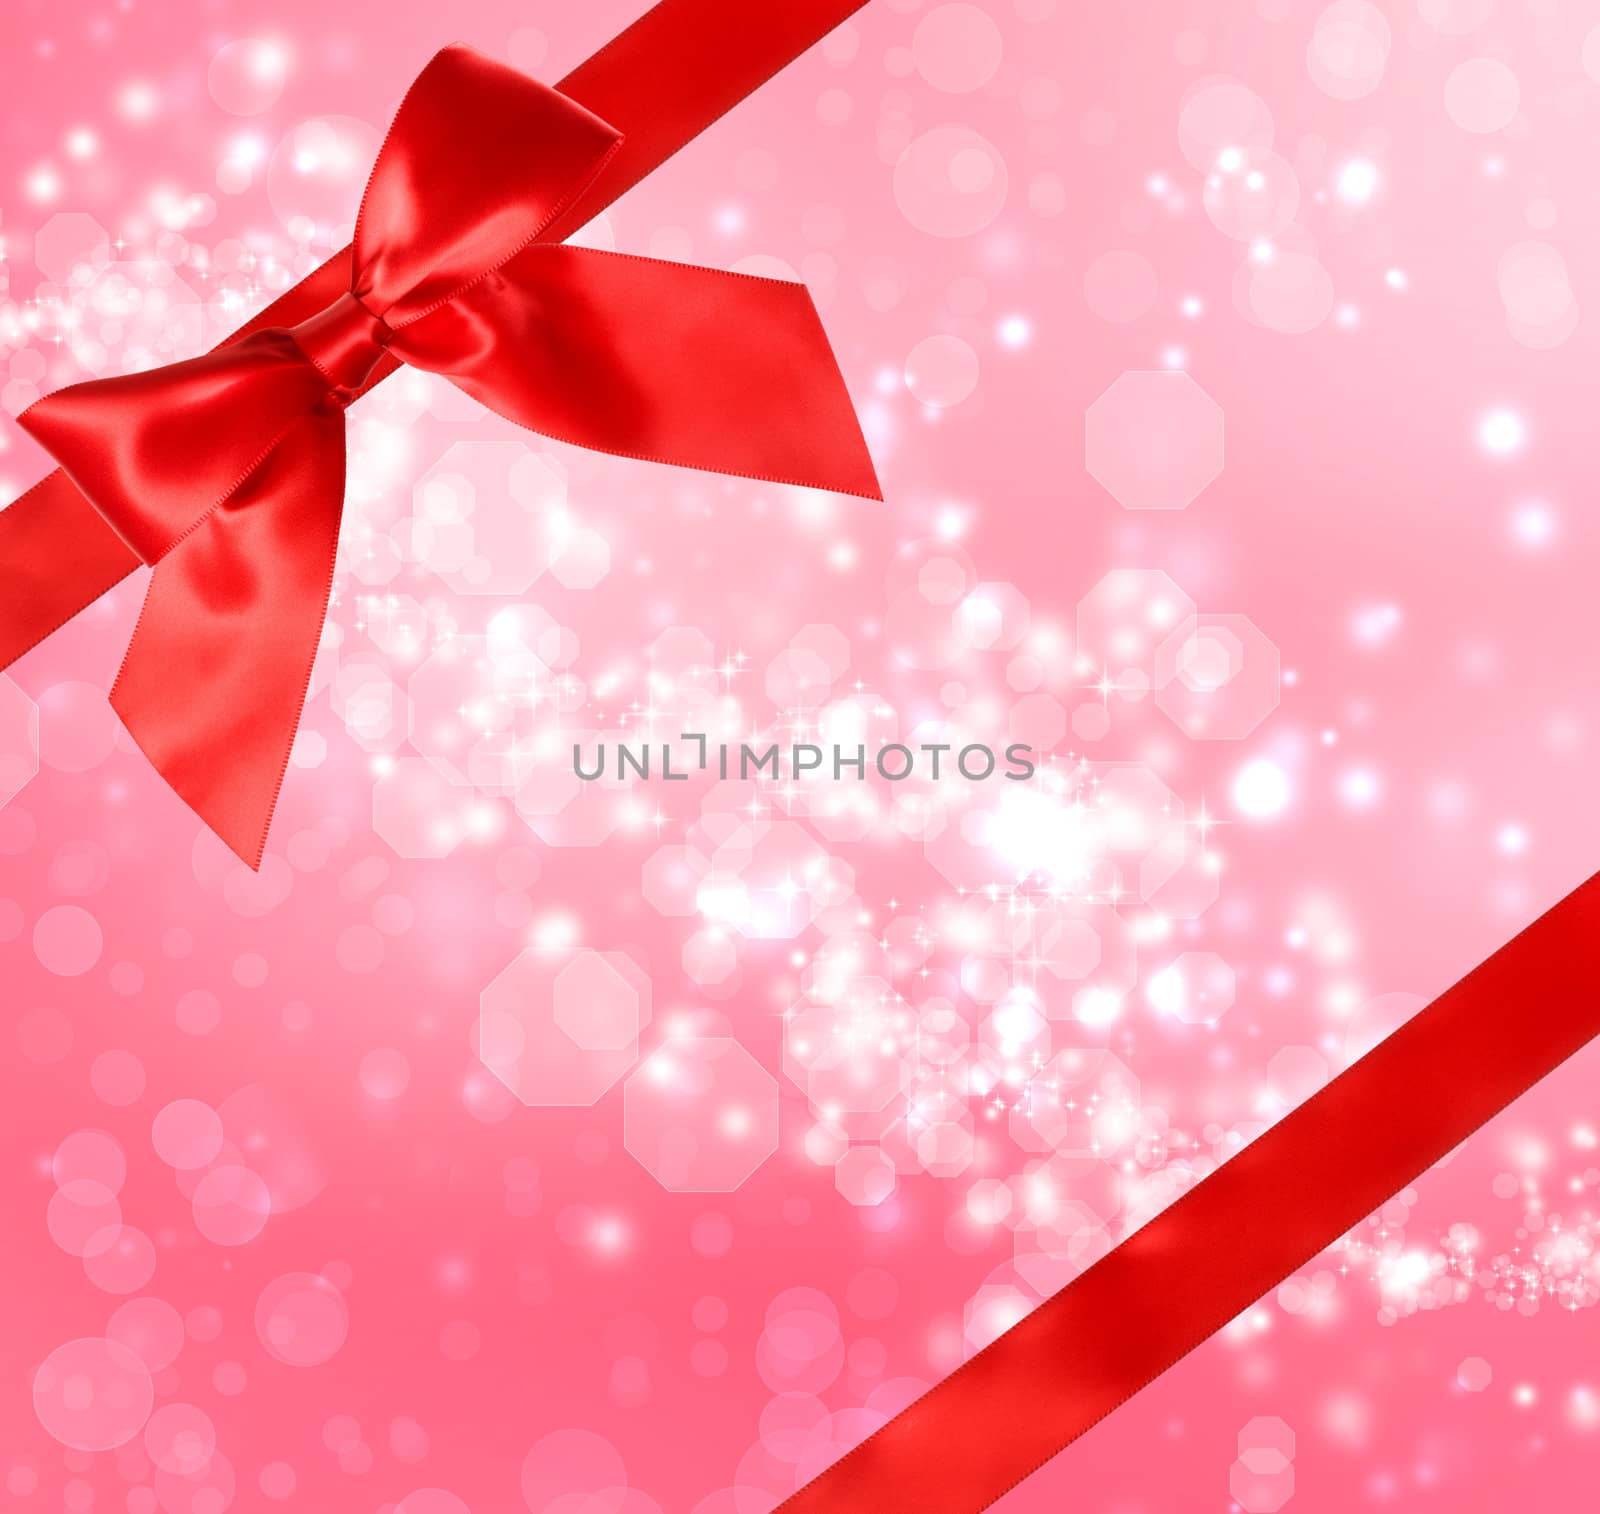 Red Bow and Ribbon with Red Abstract Lights Background 